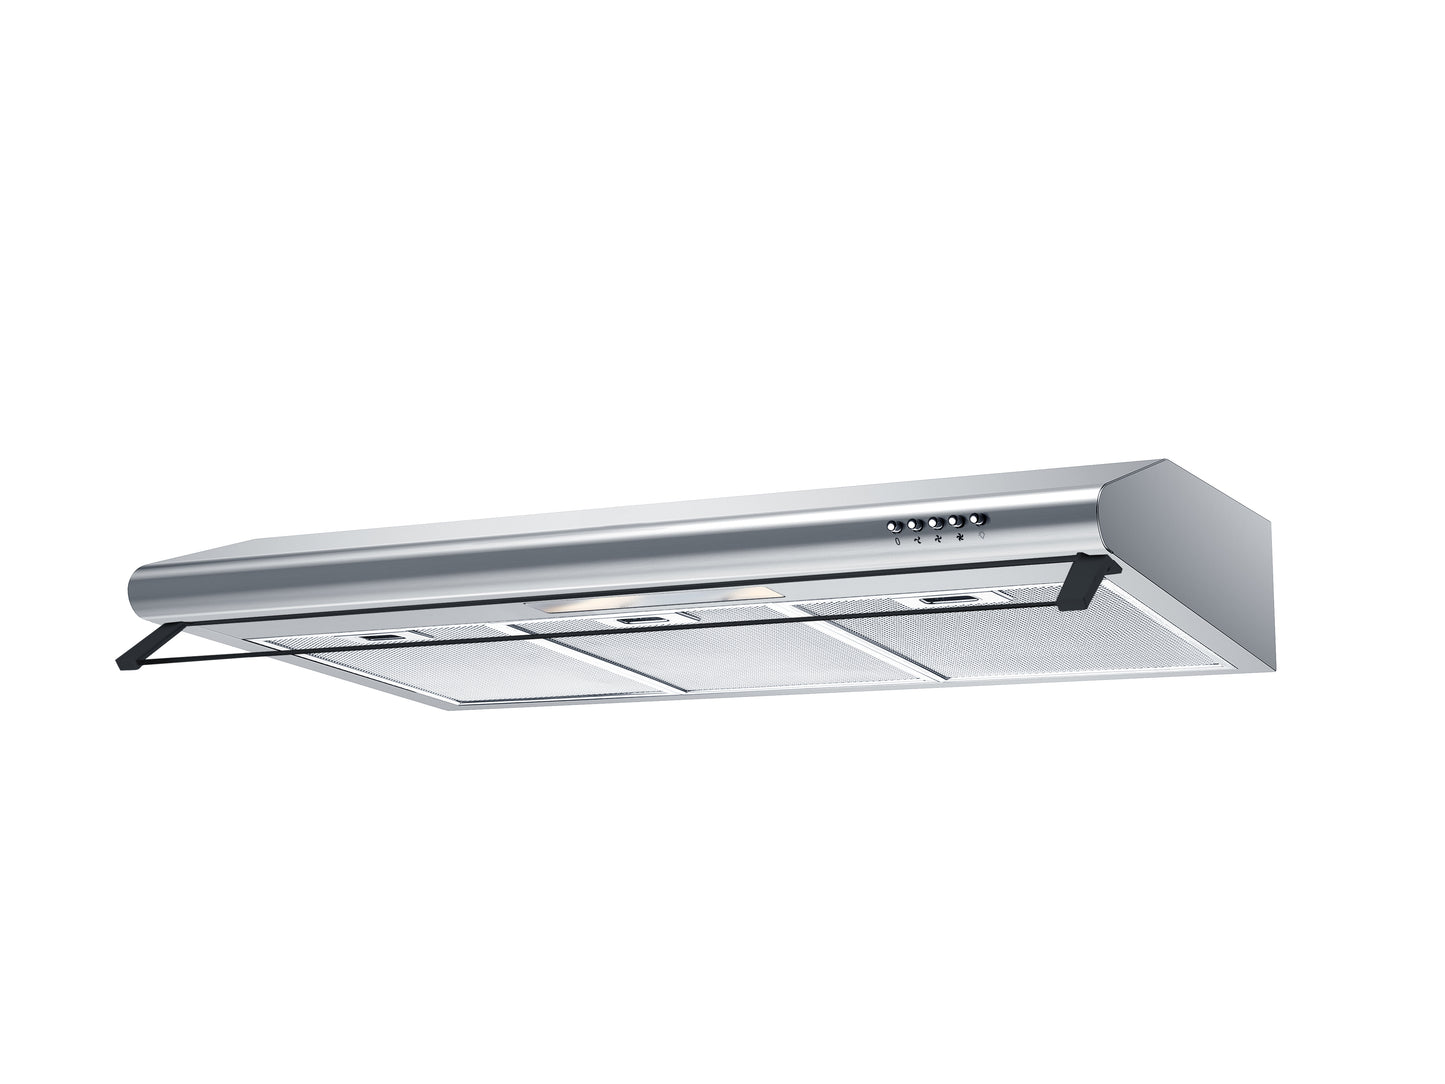 FALCO 90cm Built-in Extractor Hood - Stainless Steel - AR-90-903-SS